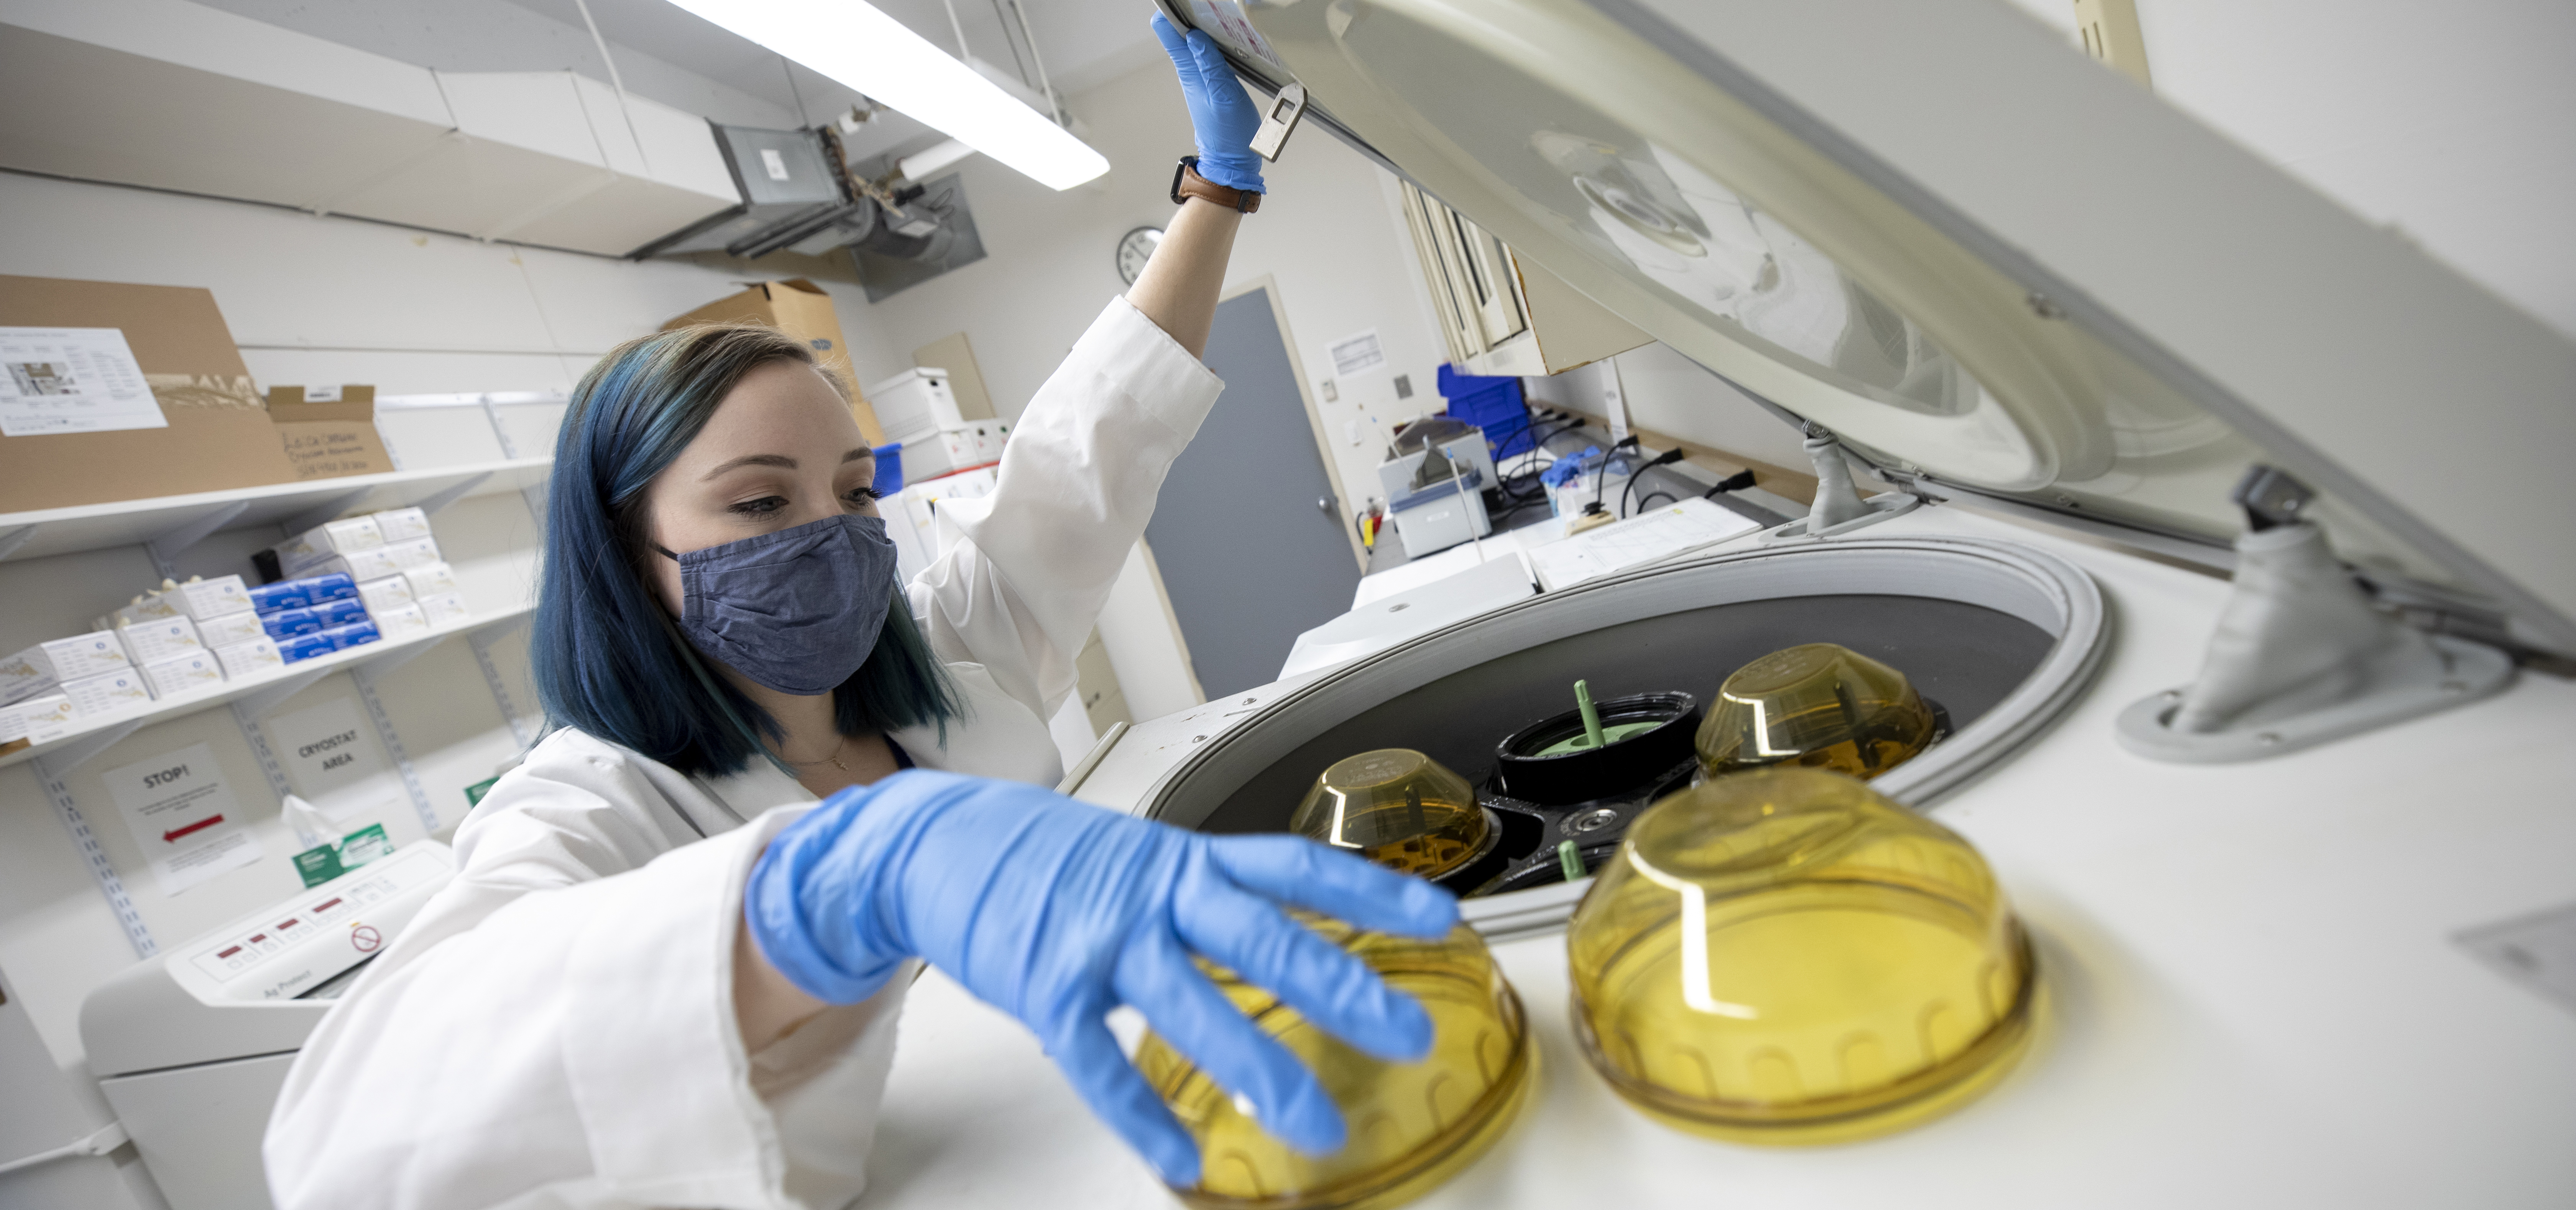 Woman putting items in lab equipment